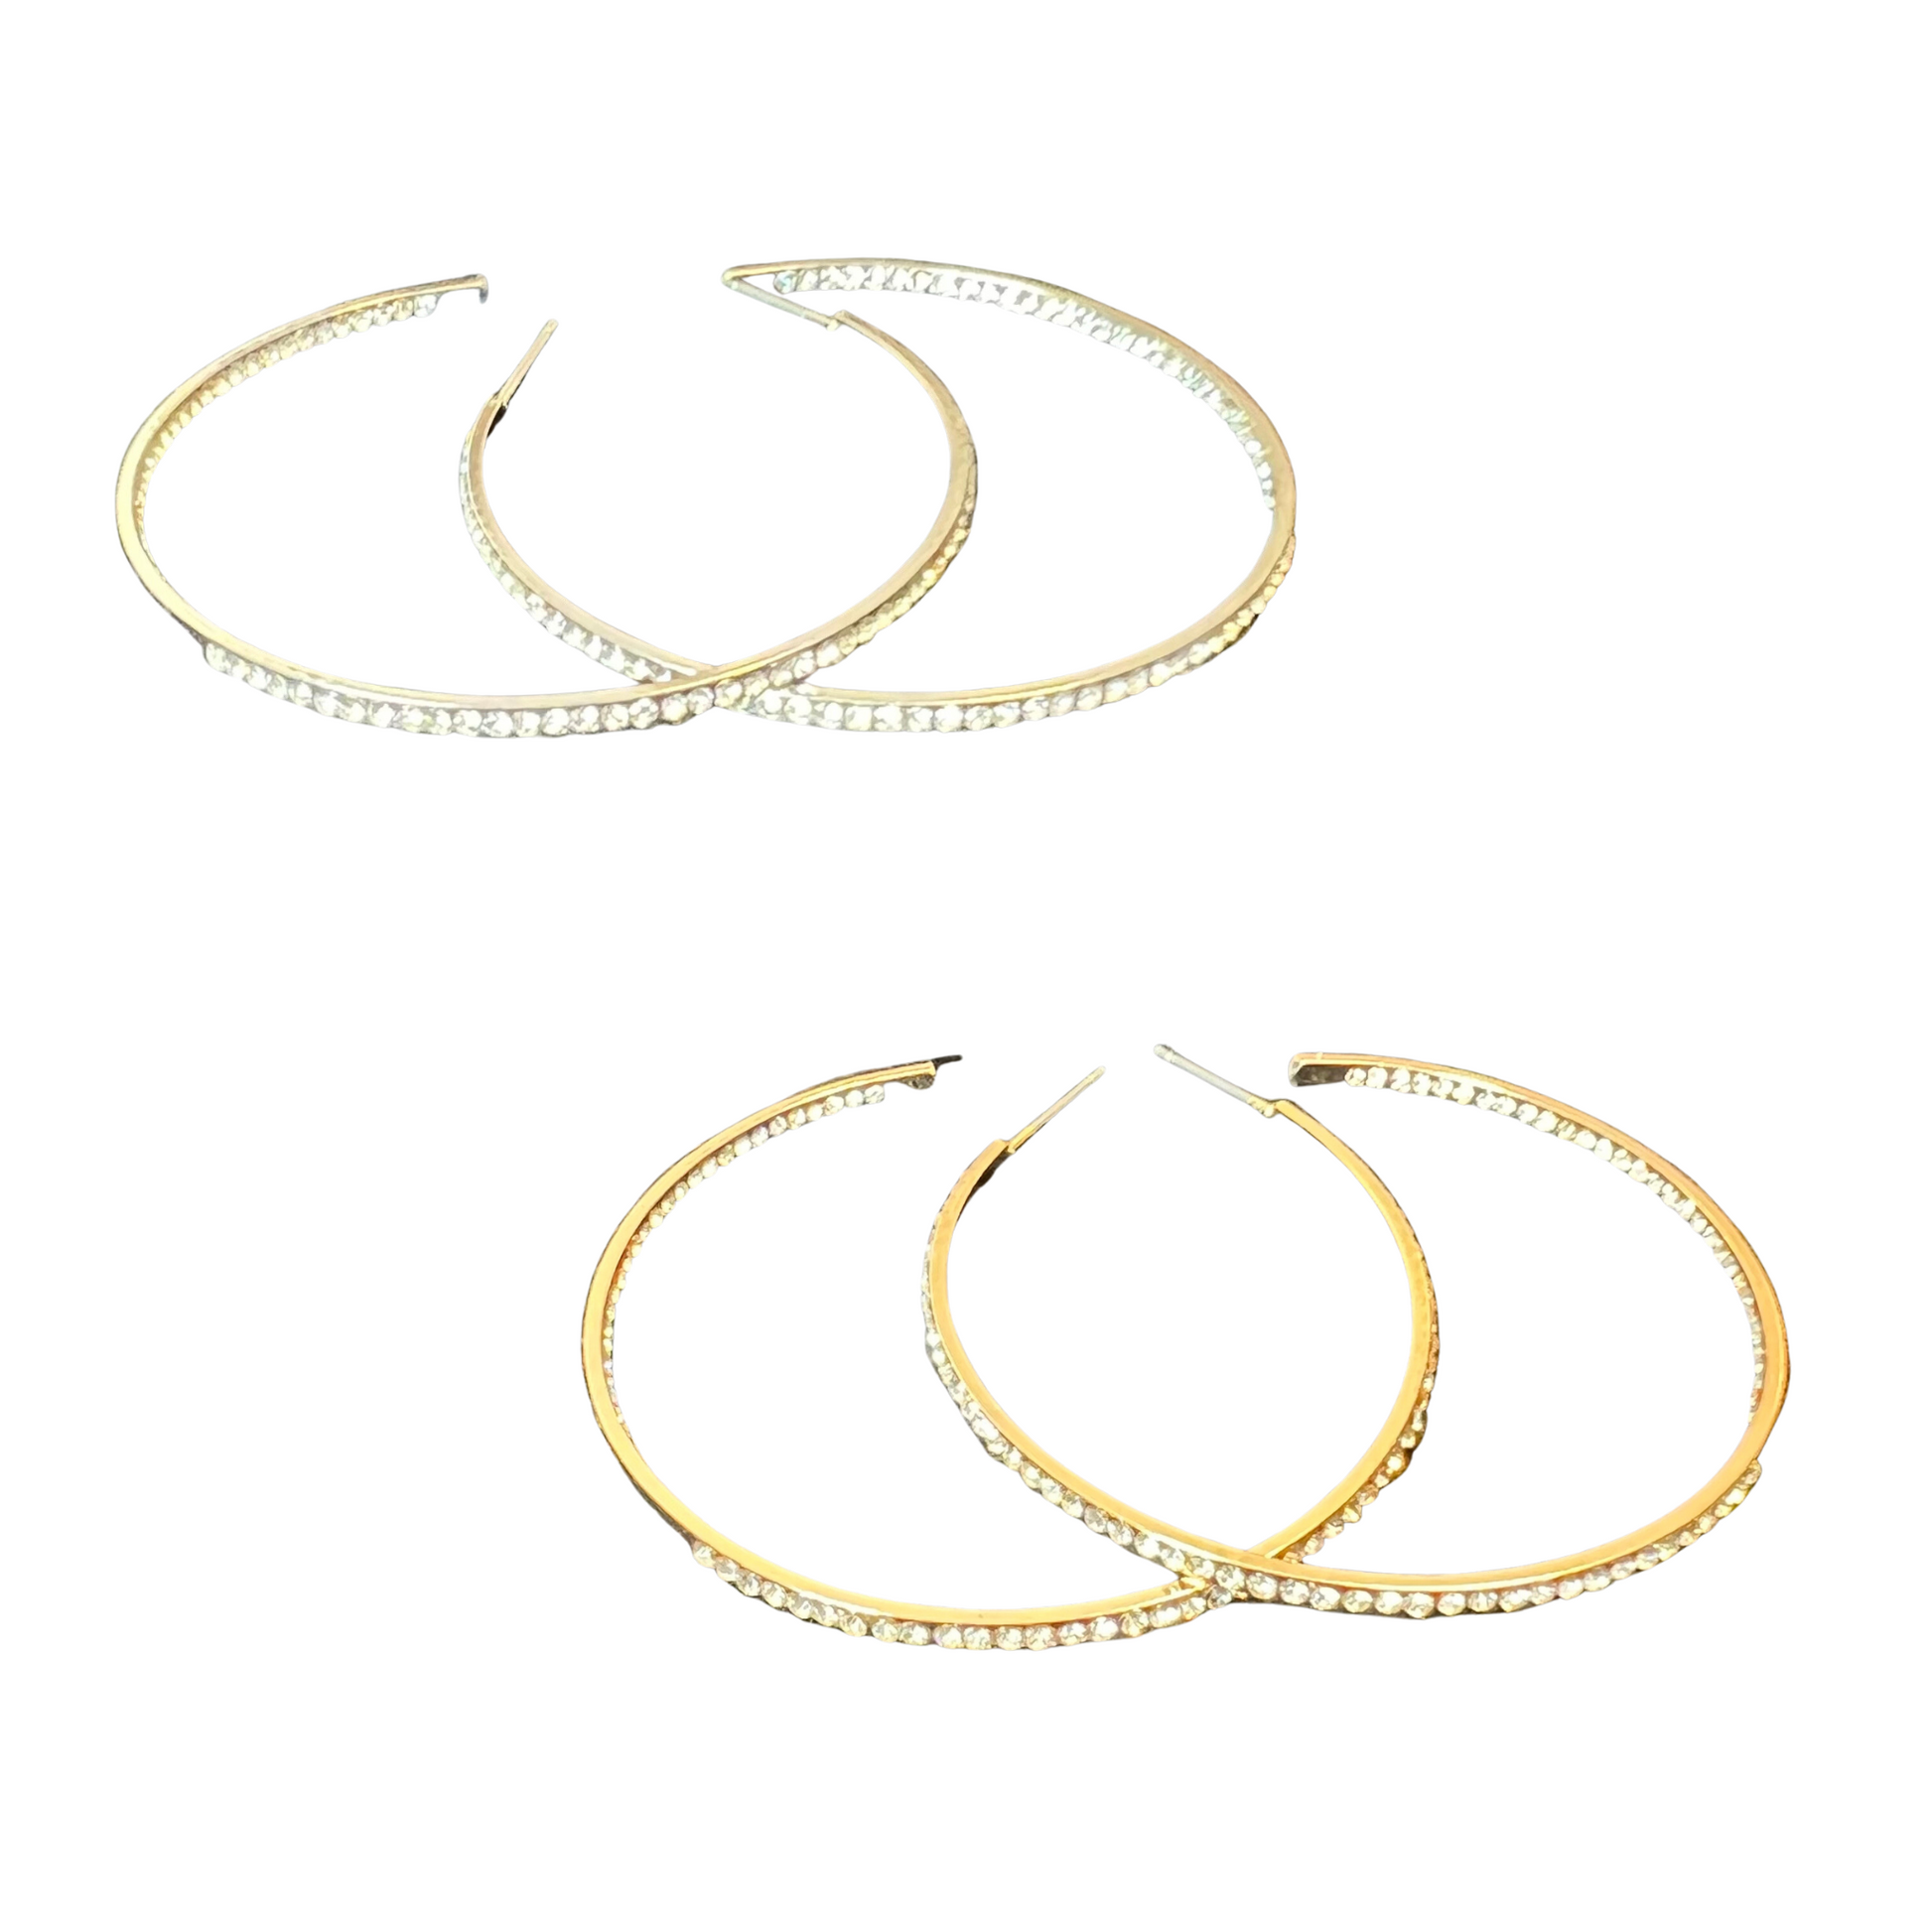 Look glamorous with these Thin Rhinestone Hoop Earrings. Crafted from a thin metal frame and lined with rhinestones, these large hoops come in either a sparkling silver or golden hue. Shine and shimmer with these earrings that are sure to turn heads.